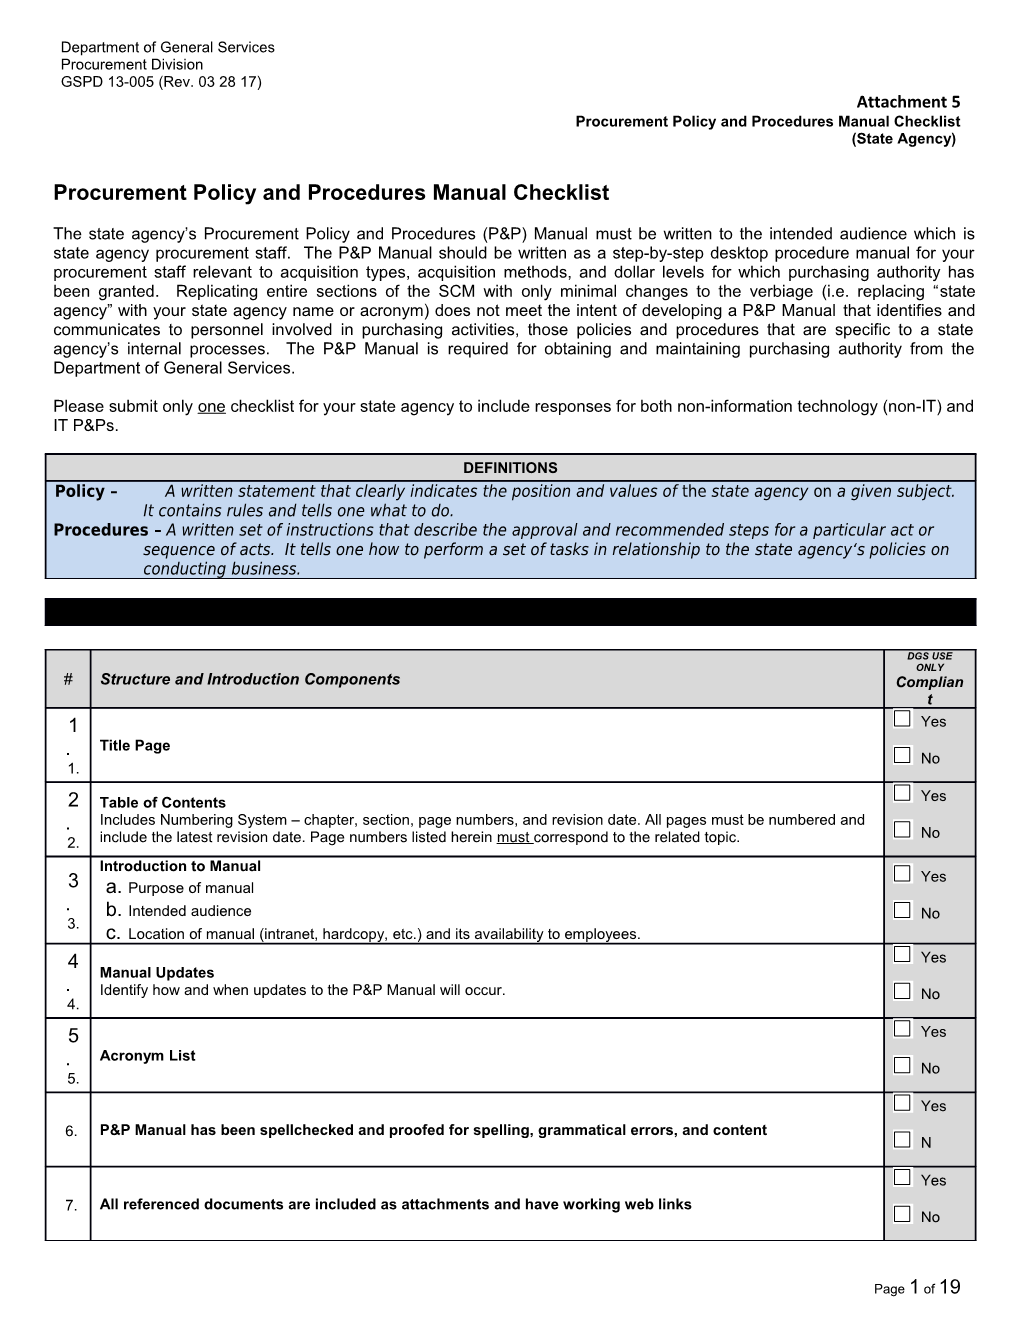 Procurement Policy and Procedures Manual Checklist